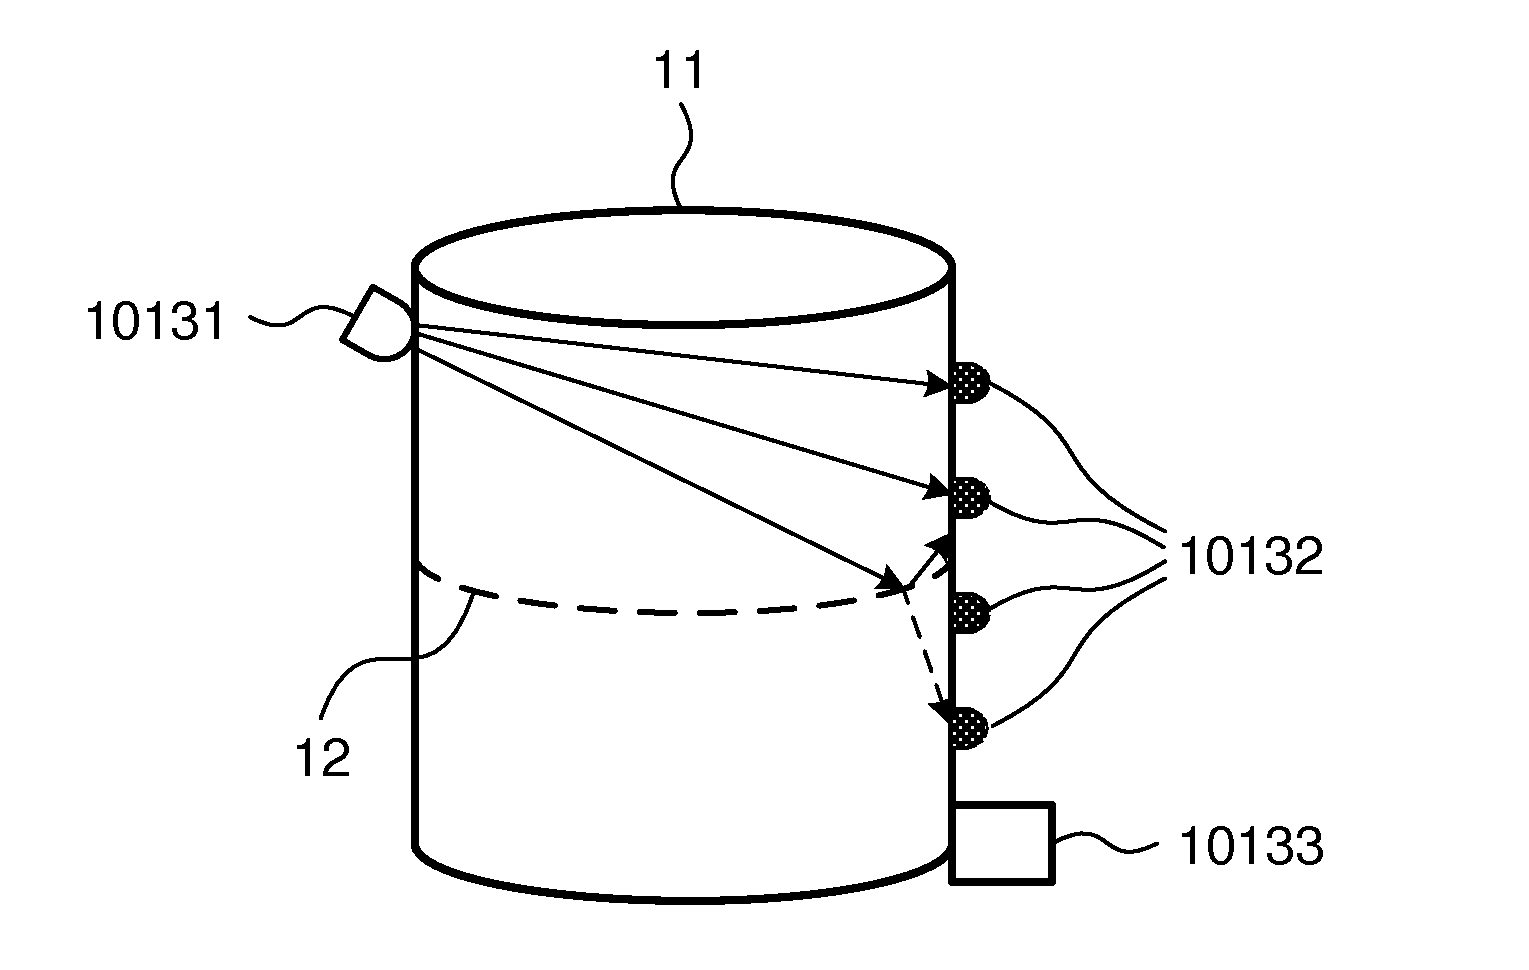 Apparatuses and Methods for Managing Liquid Volume in a Container